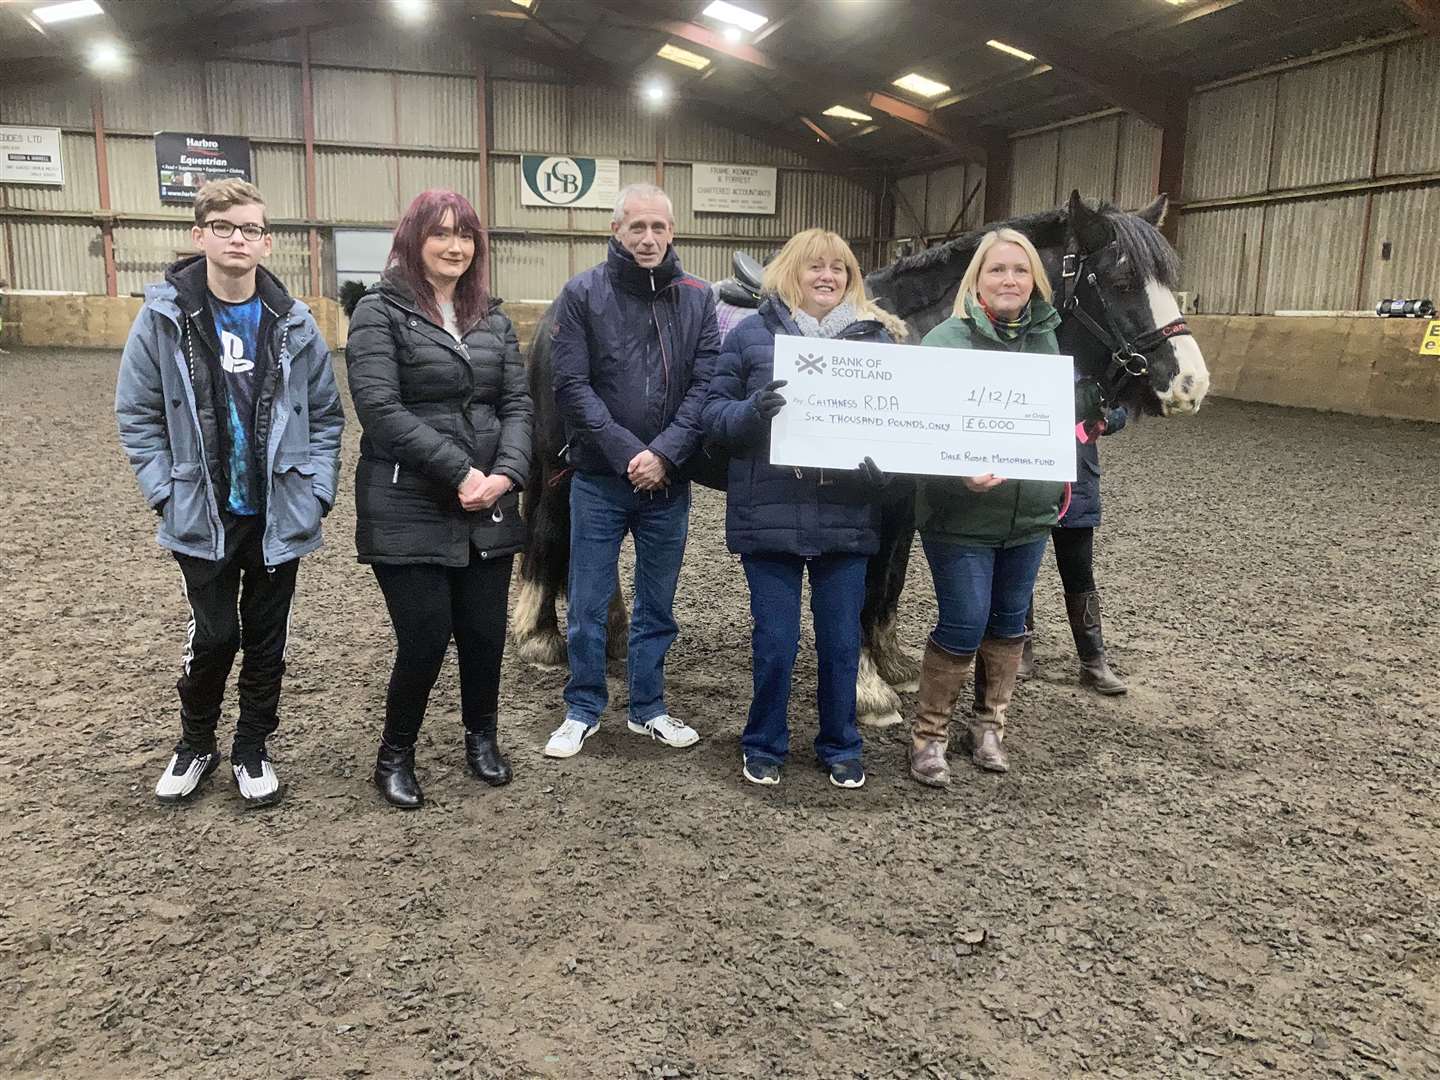 John and Heather Rosie present a cheque for £6000 from the Dale Rosie Memorial Fund to group chairperson Judith Miller. Also in the picture are Claire Fraser and her son Rory (left|).